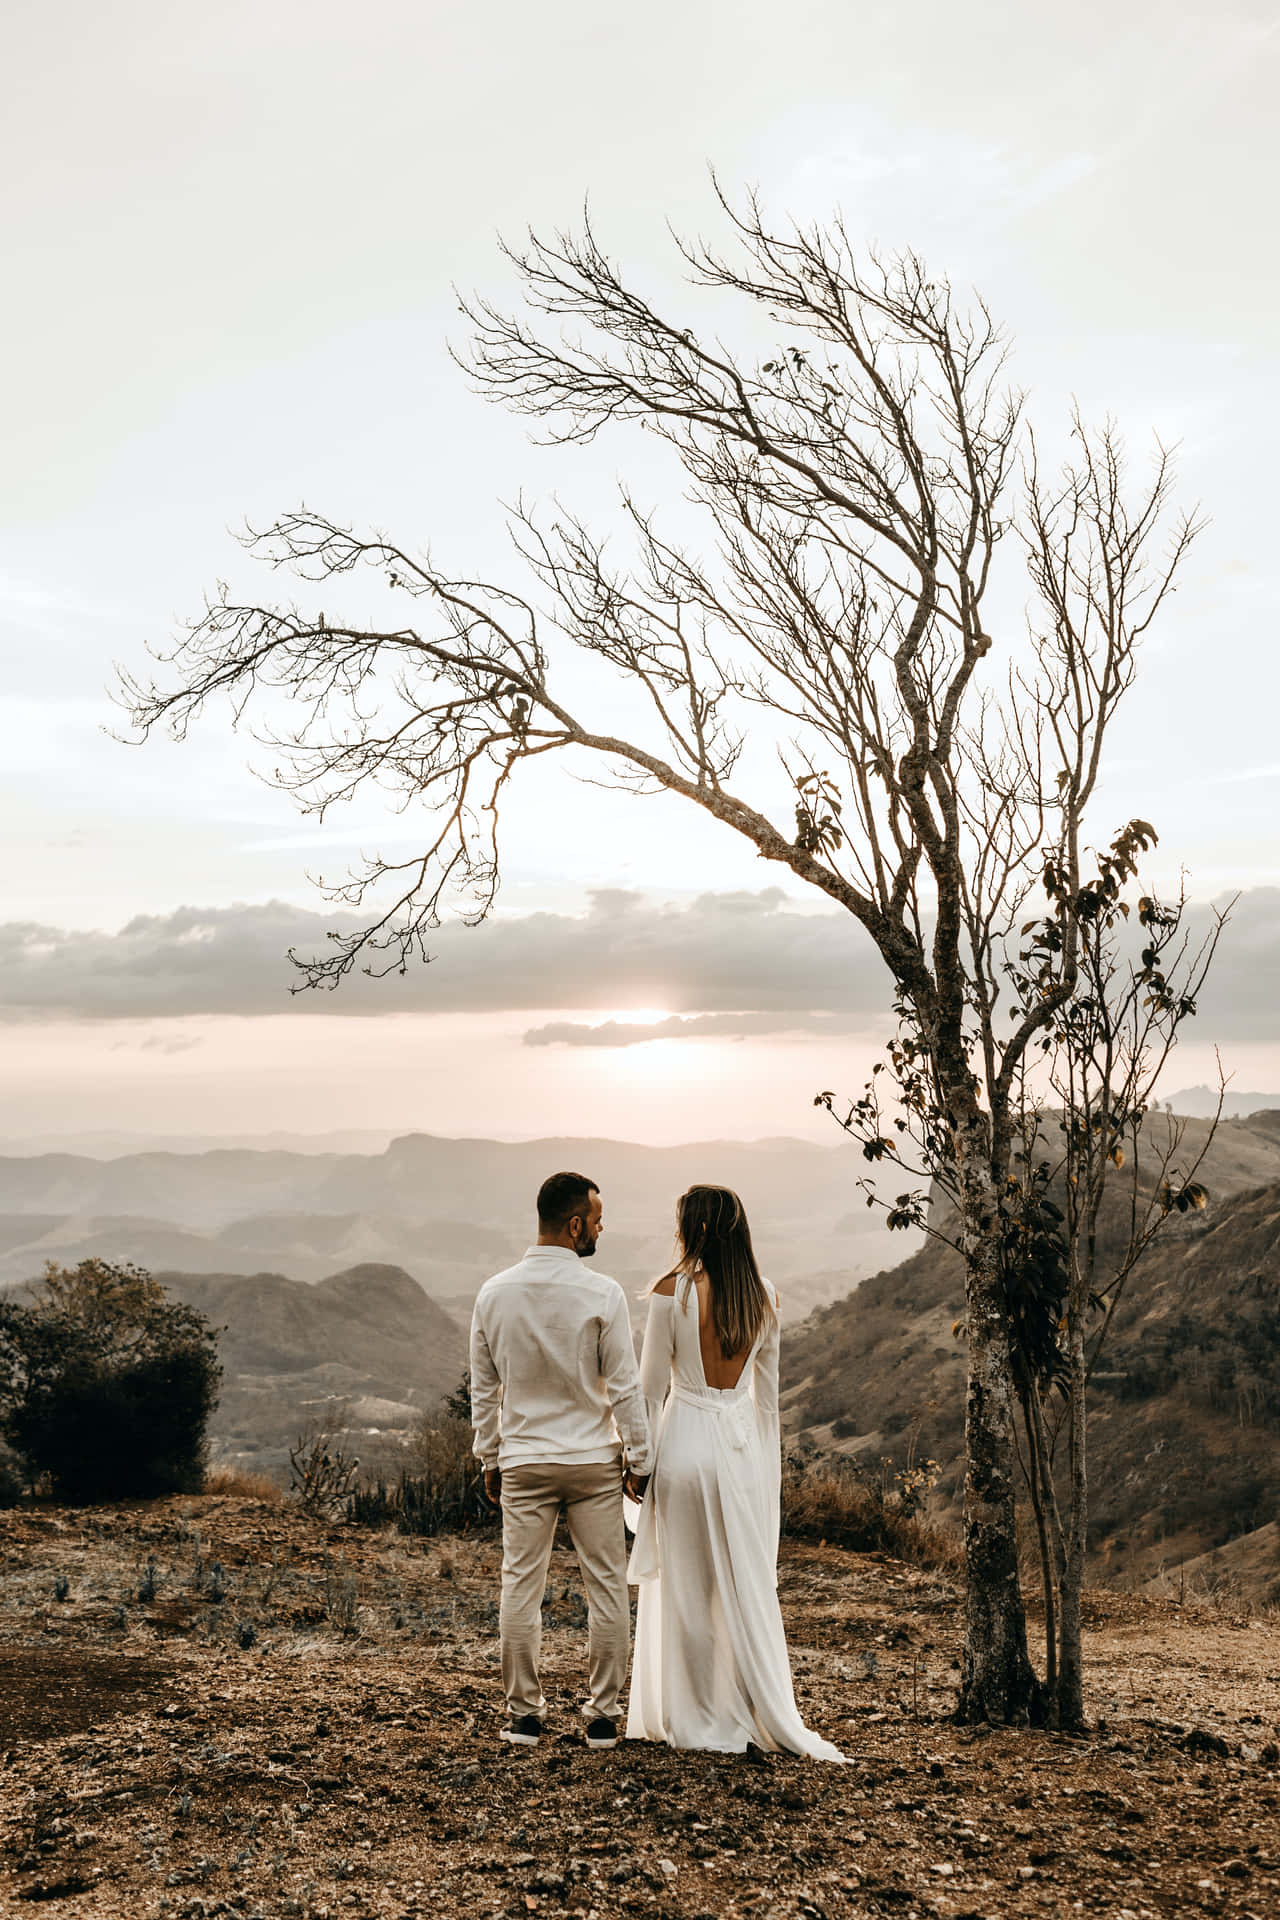 A Bride And Groom Standing On A Hill Overlooking The Mountains Wallpaper